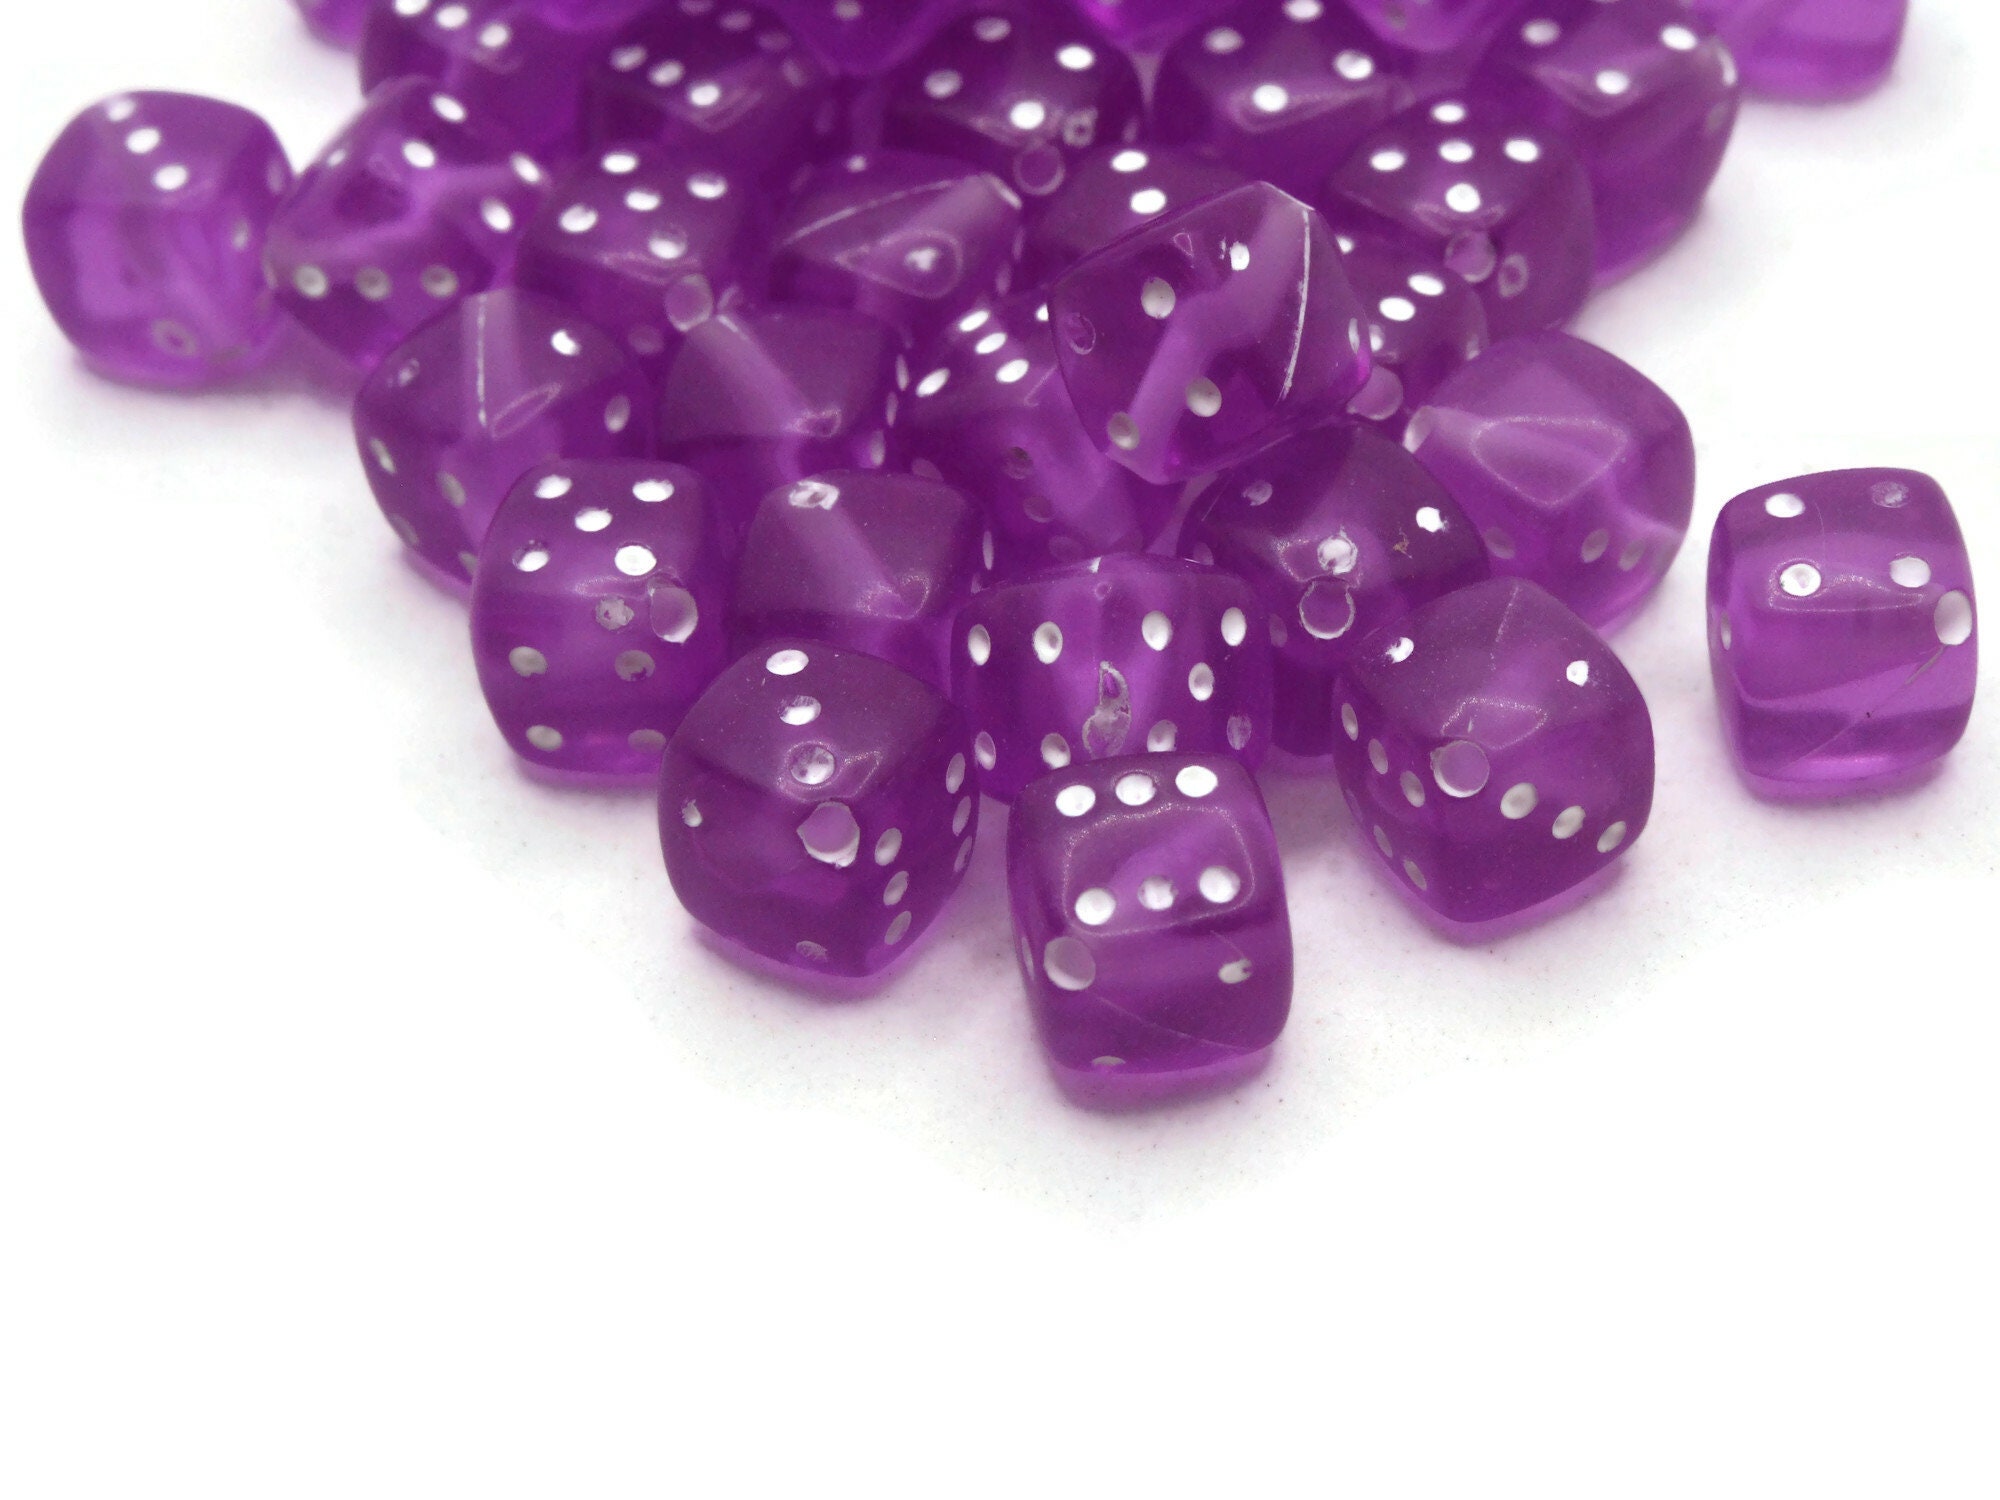 50 8mm Bright Pink Plastic Dice Beads by Smileyboy Beads | Michaels